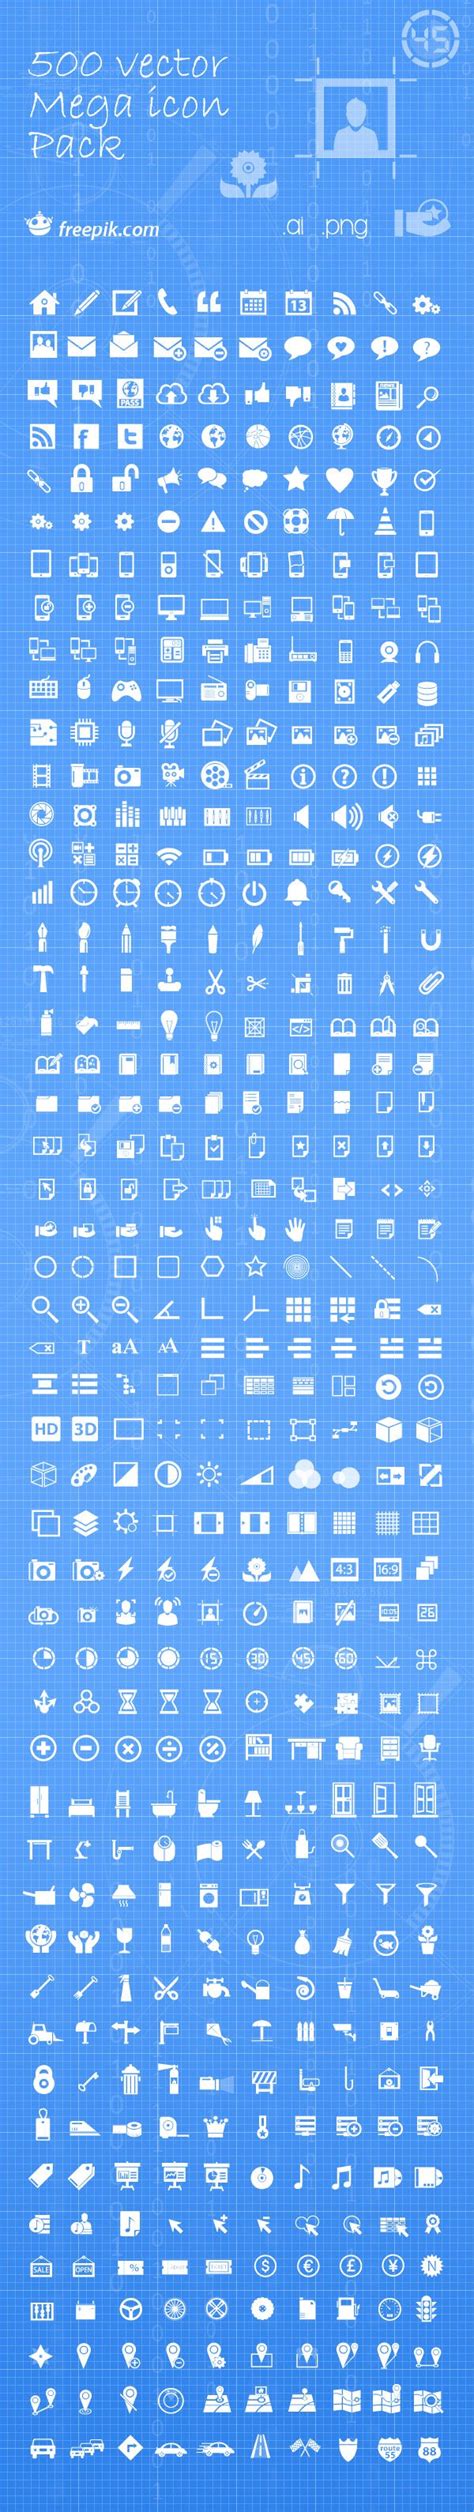 Friday Freebies Free Psd Files For Designers 16 Web Icons Vector